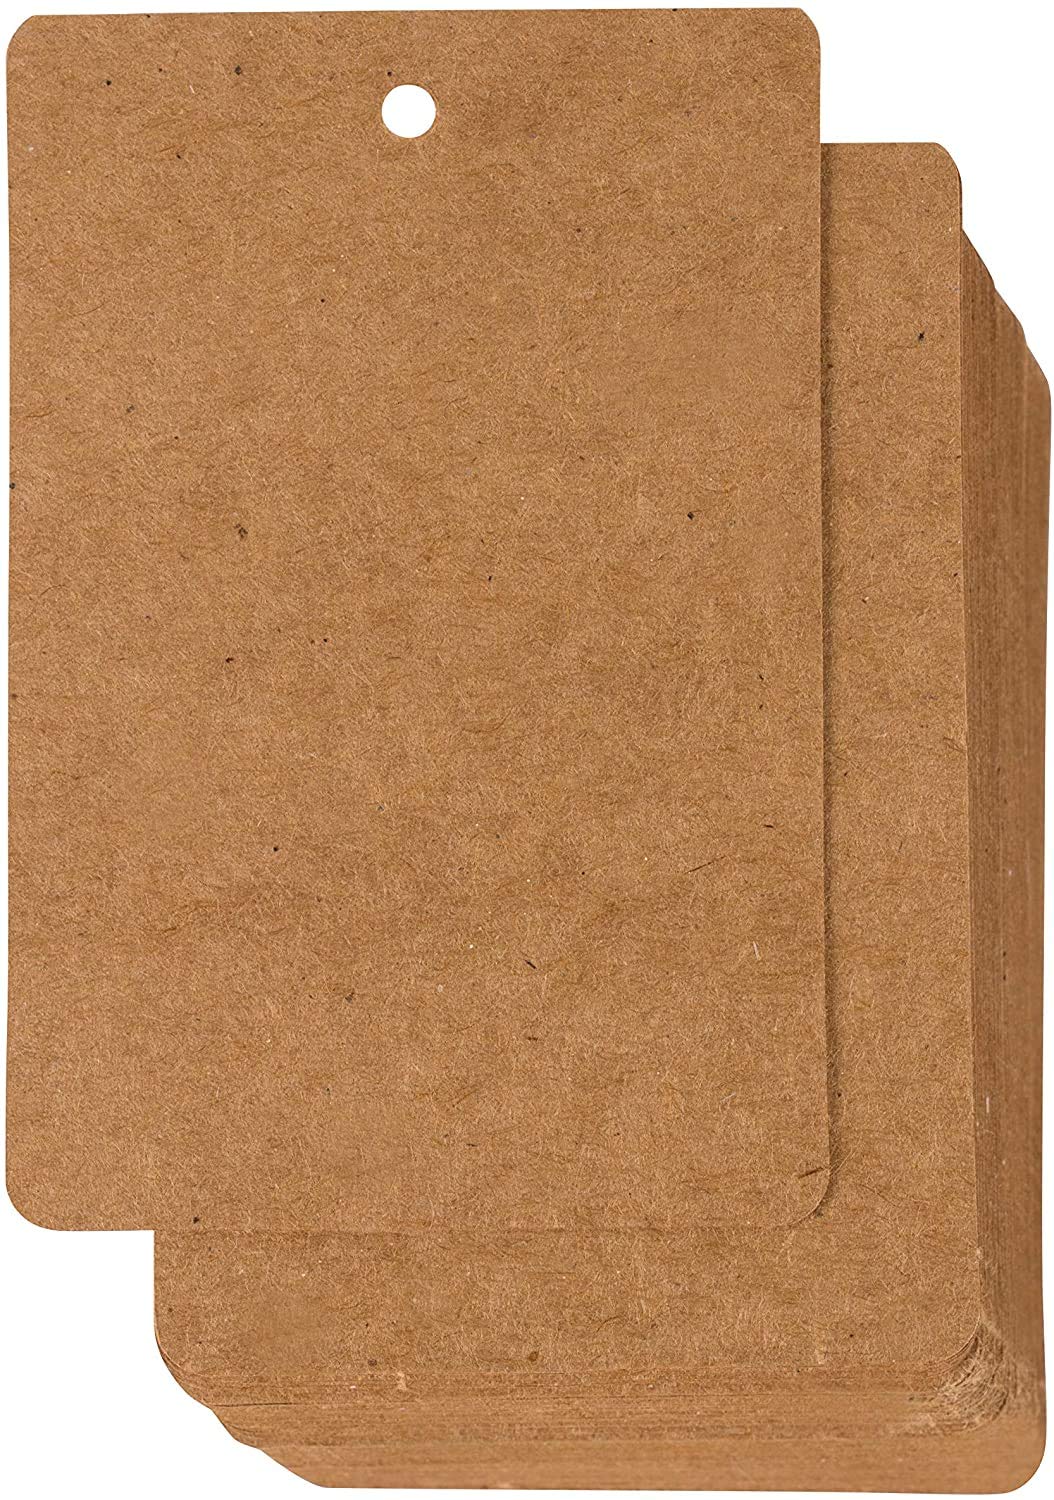 300-Pack Kraft Paper Tags, Merchandise Tags, Writable Tags, Craft Hang Labels, Name Price Size Labels, for Wedding, Birthday, Holiday, Party Favor, Kraft Brown, 2.375 x 3.5 inches - Haoser